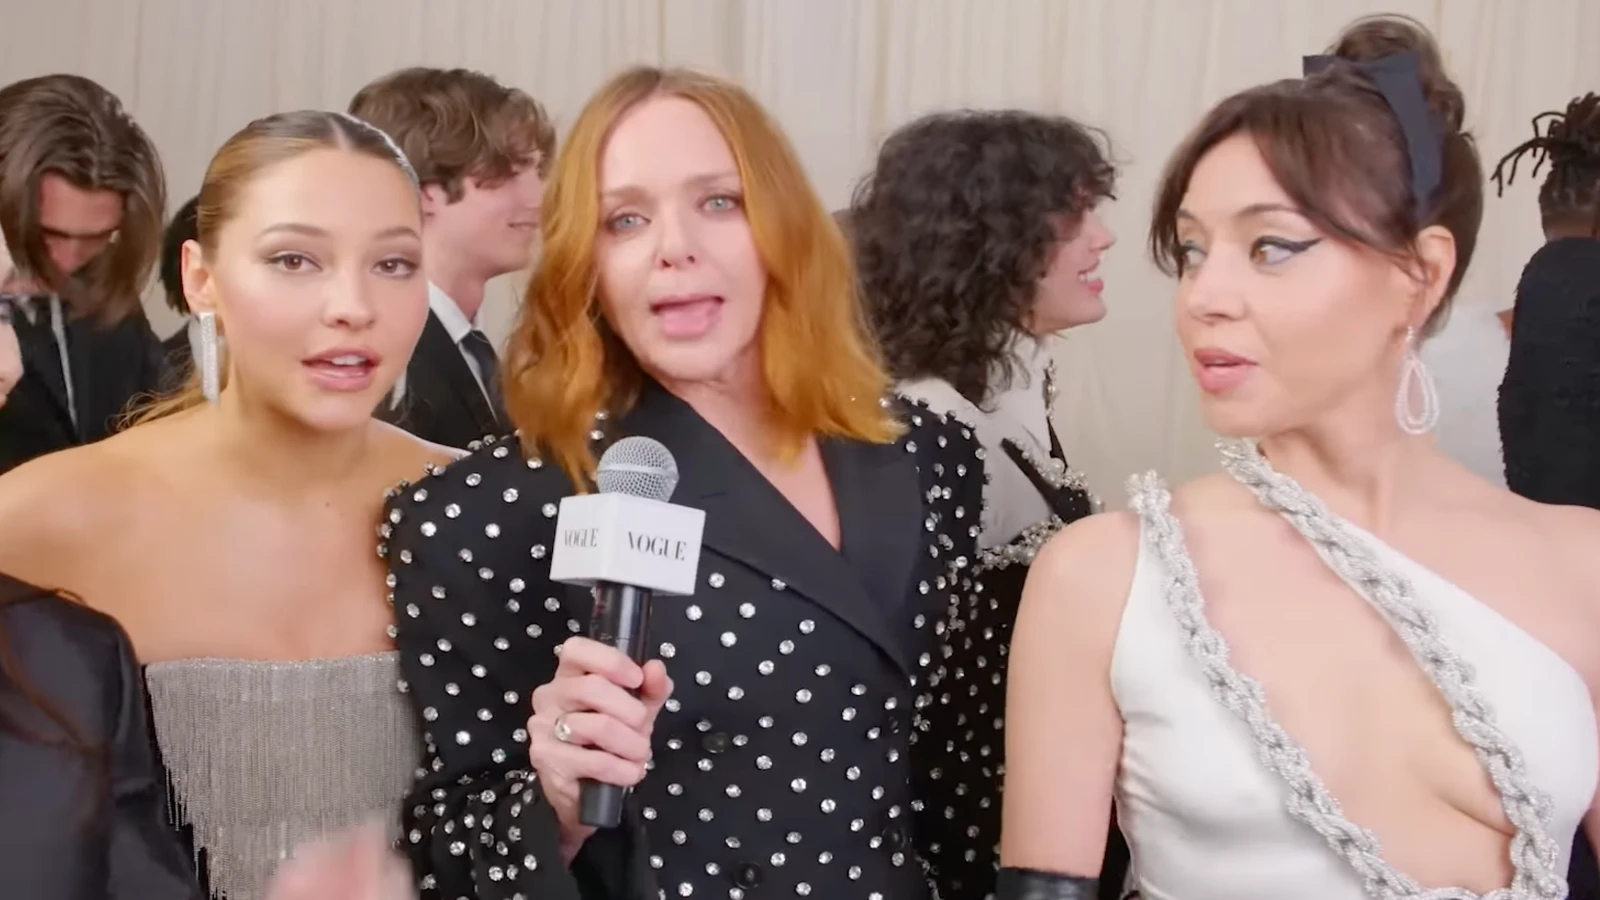 Did Stella McCartney ask the interviewer to be more serious